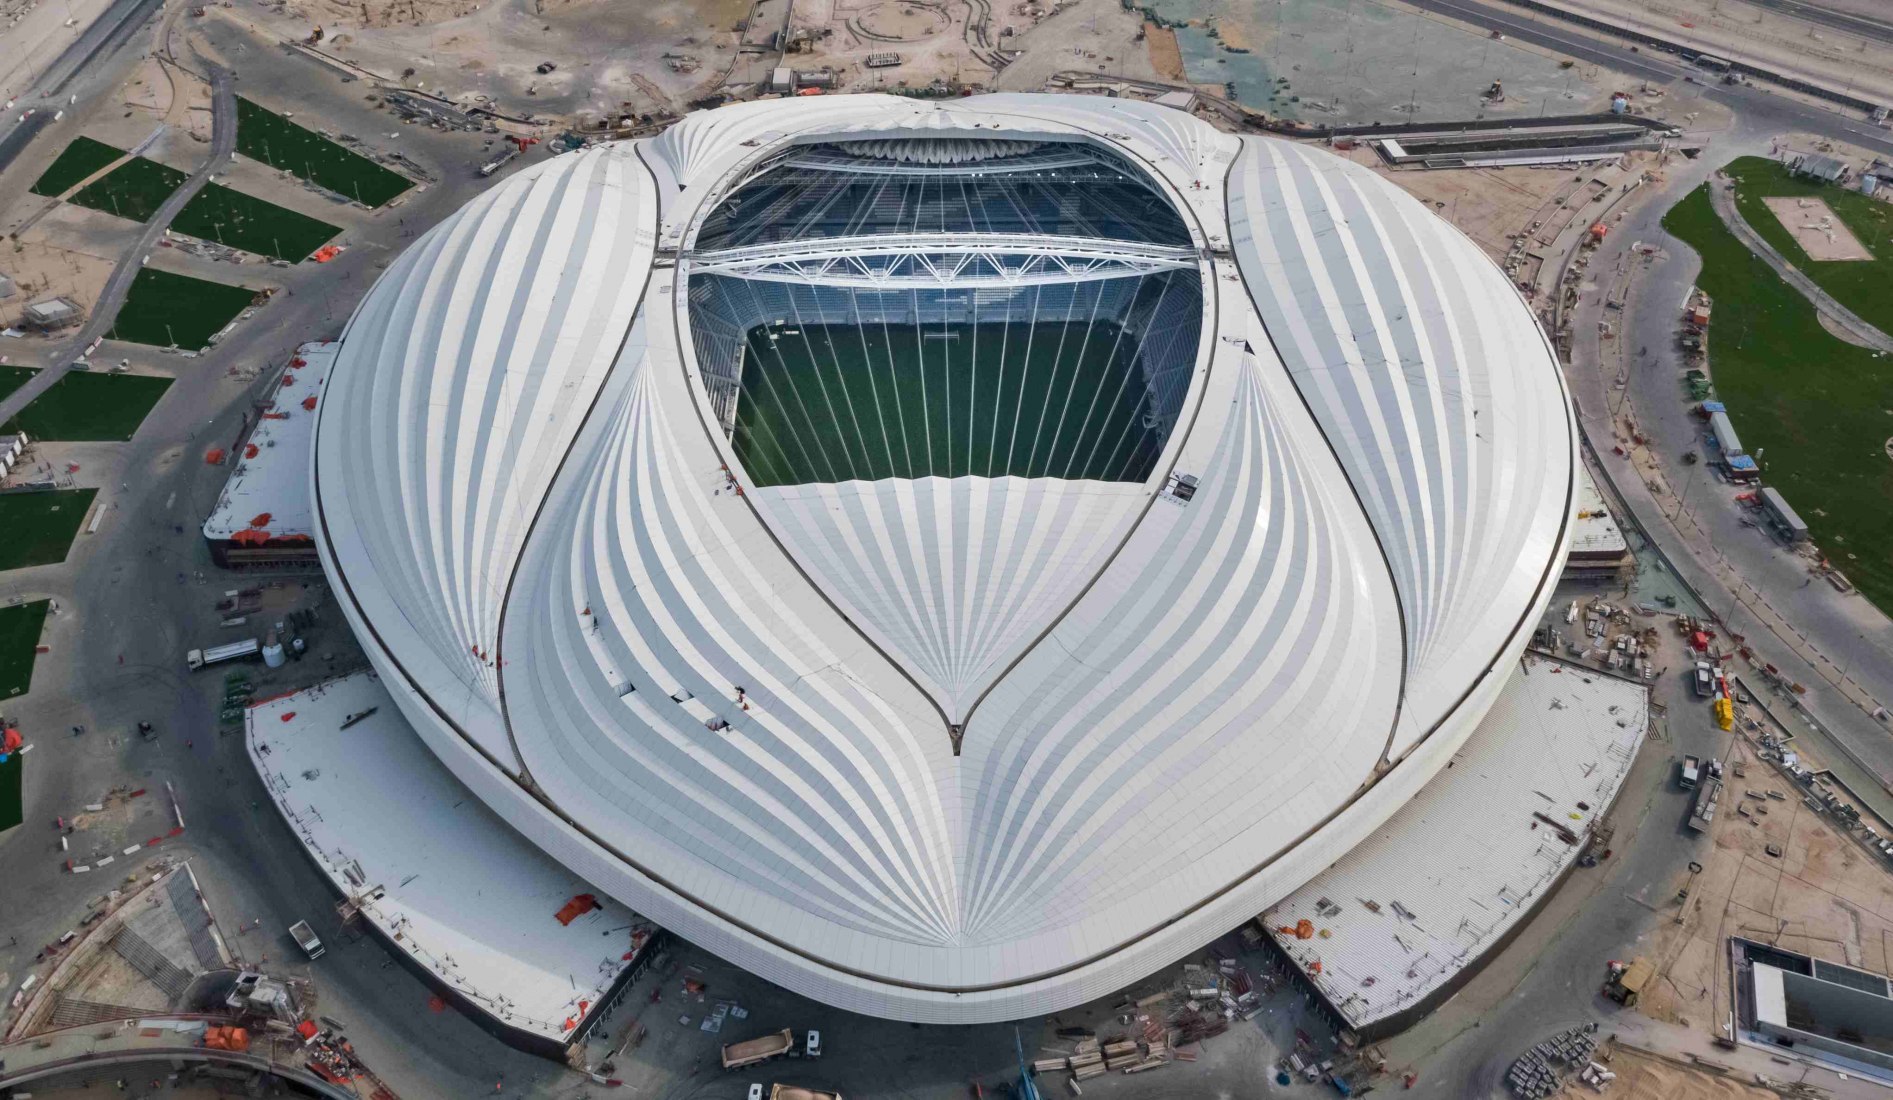 Al Janoub Stadium by Zaha Hadid Architects. Photograph courtesy of Supreme Committee for Delivery & Legacy